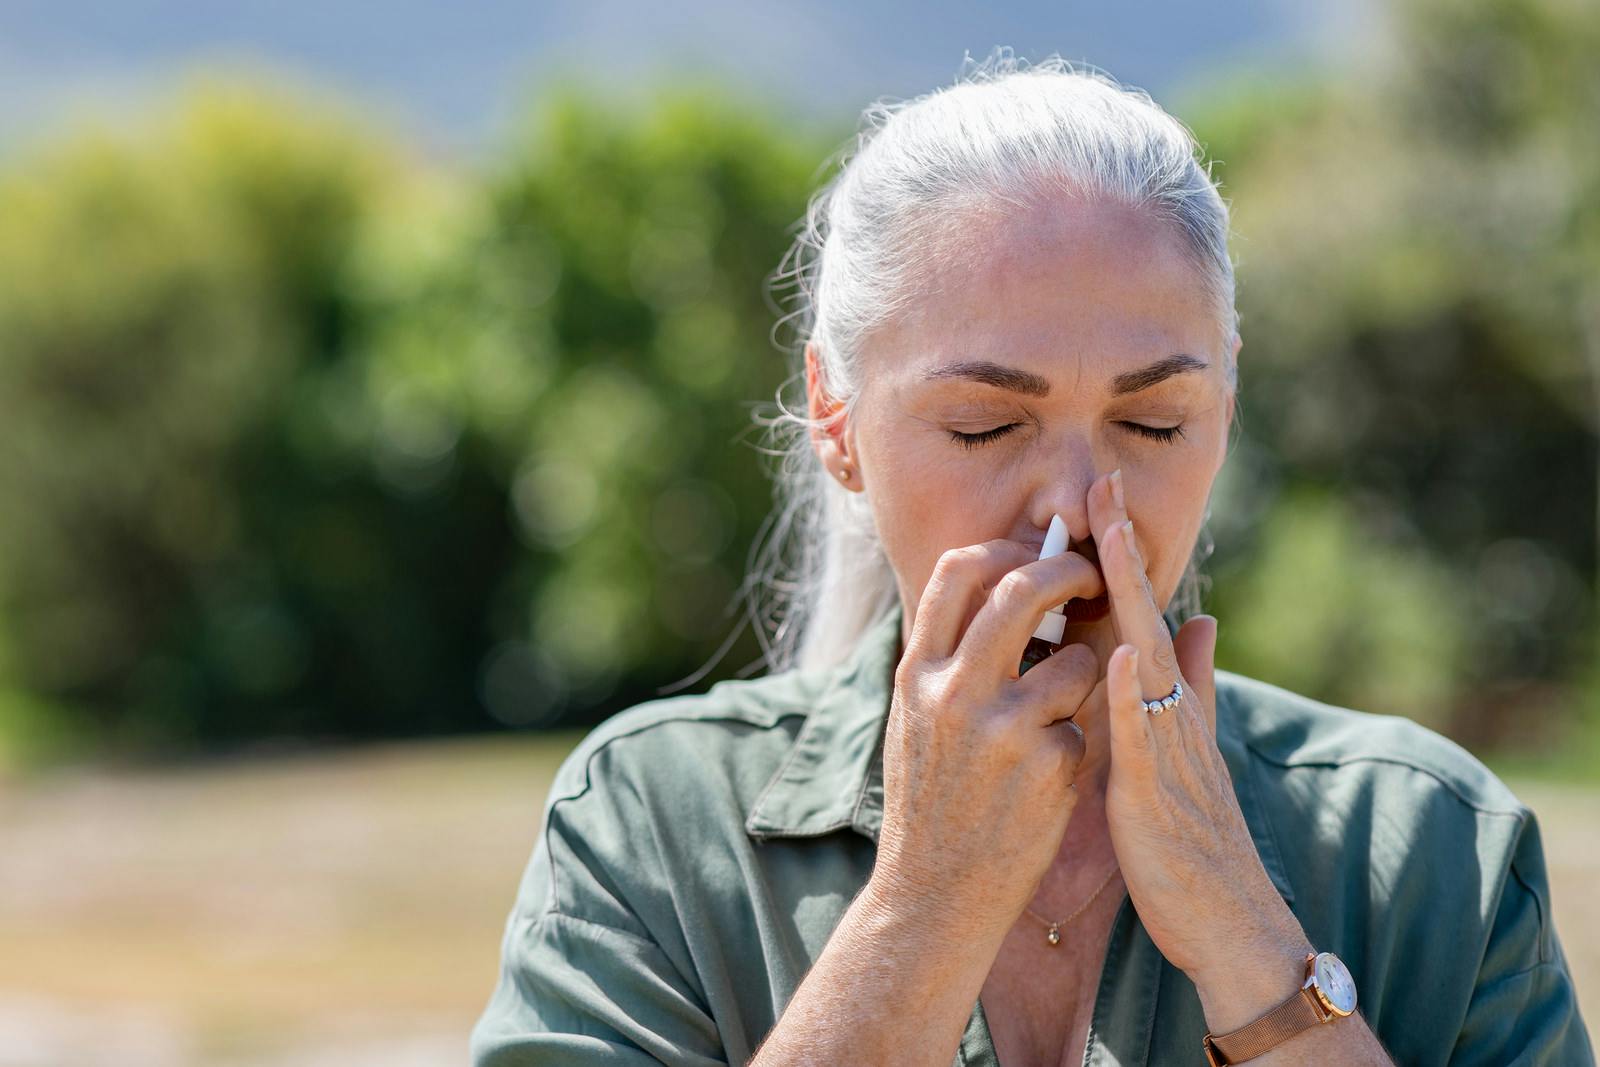 Senior woman having flu using nasal spray to help herself. Woman using a nasal spray at park for allergy. Ill mature woman with grey hair inhaling medicine against allergy.
